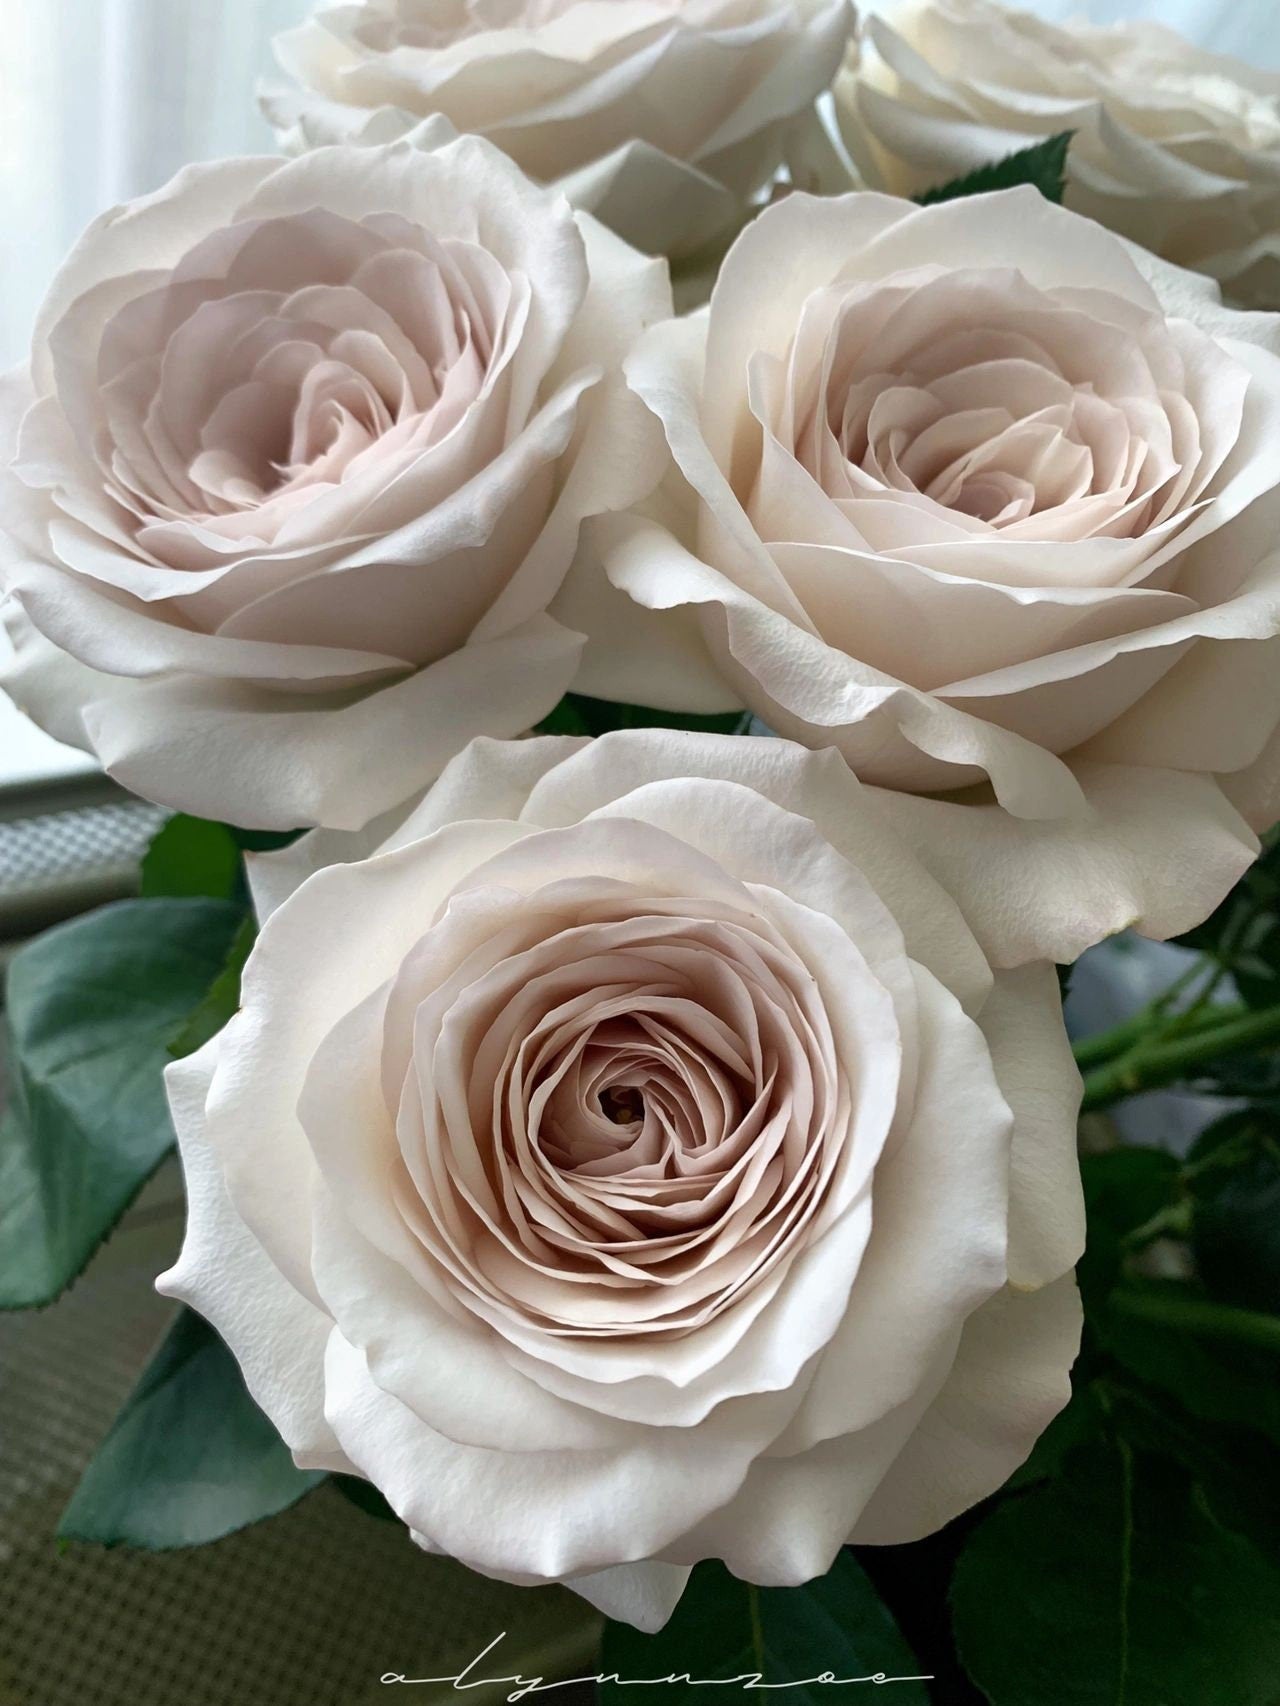 Pearlescence Rose【Sliver Lining】1.5 Gal OwnRoot| Silver-gray | Strong Disease Resistance | Thornless| Abundant Bloom| Strong Upright 银色衬裙